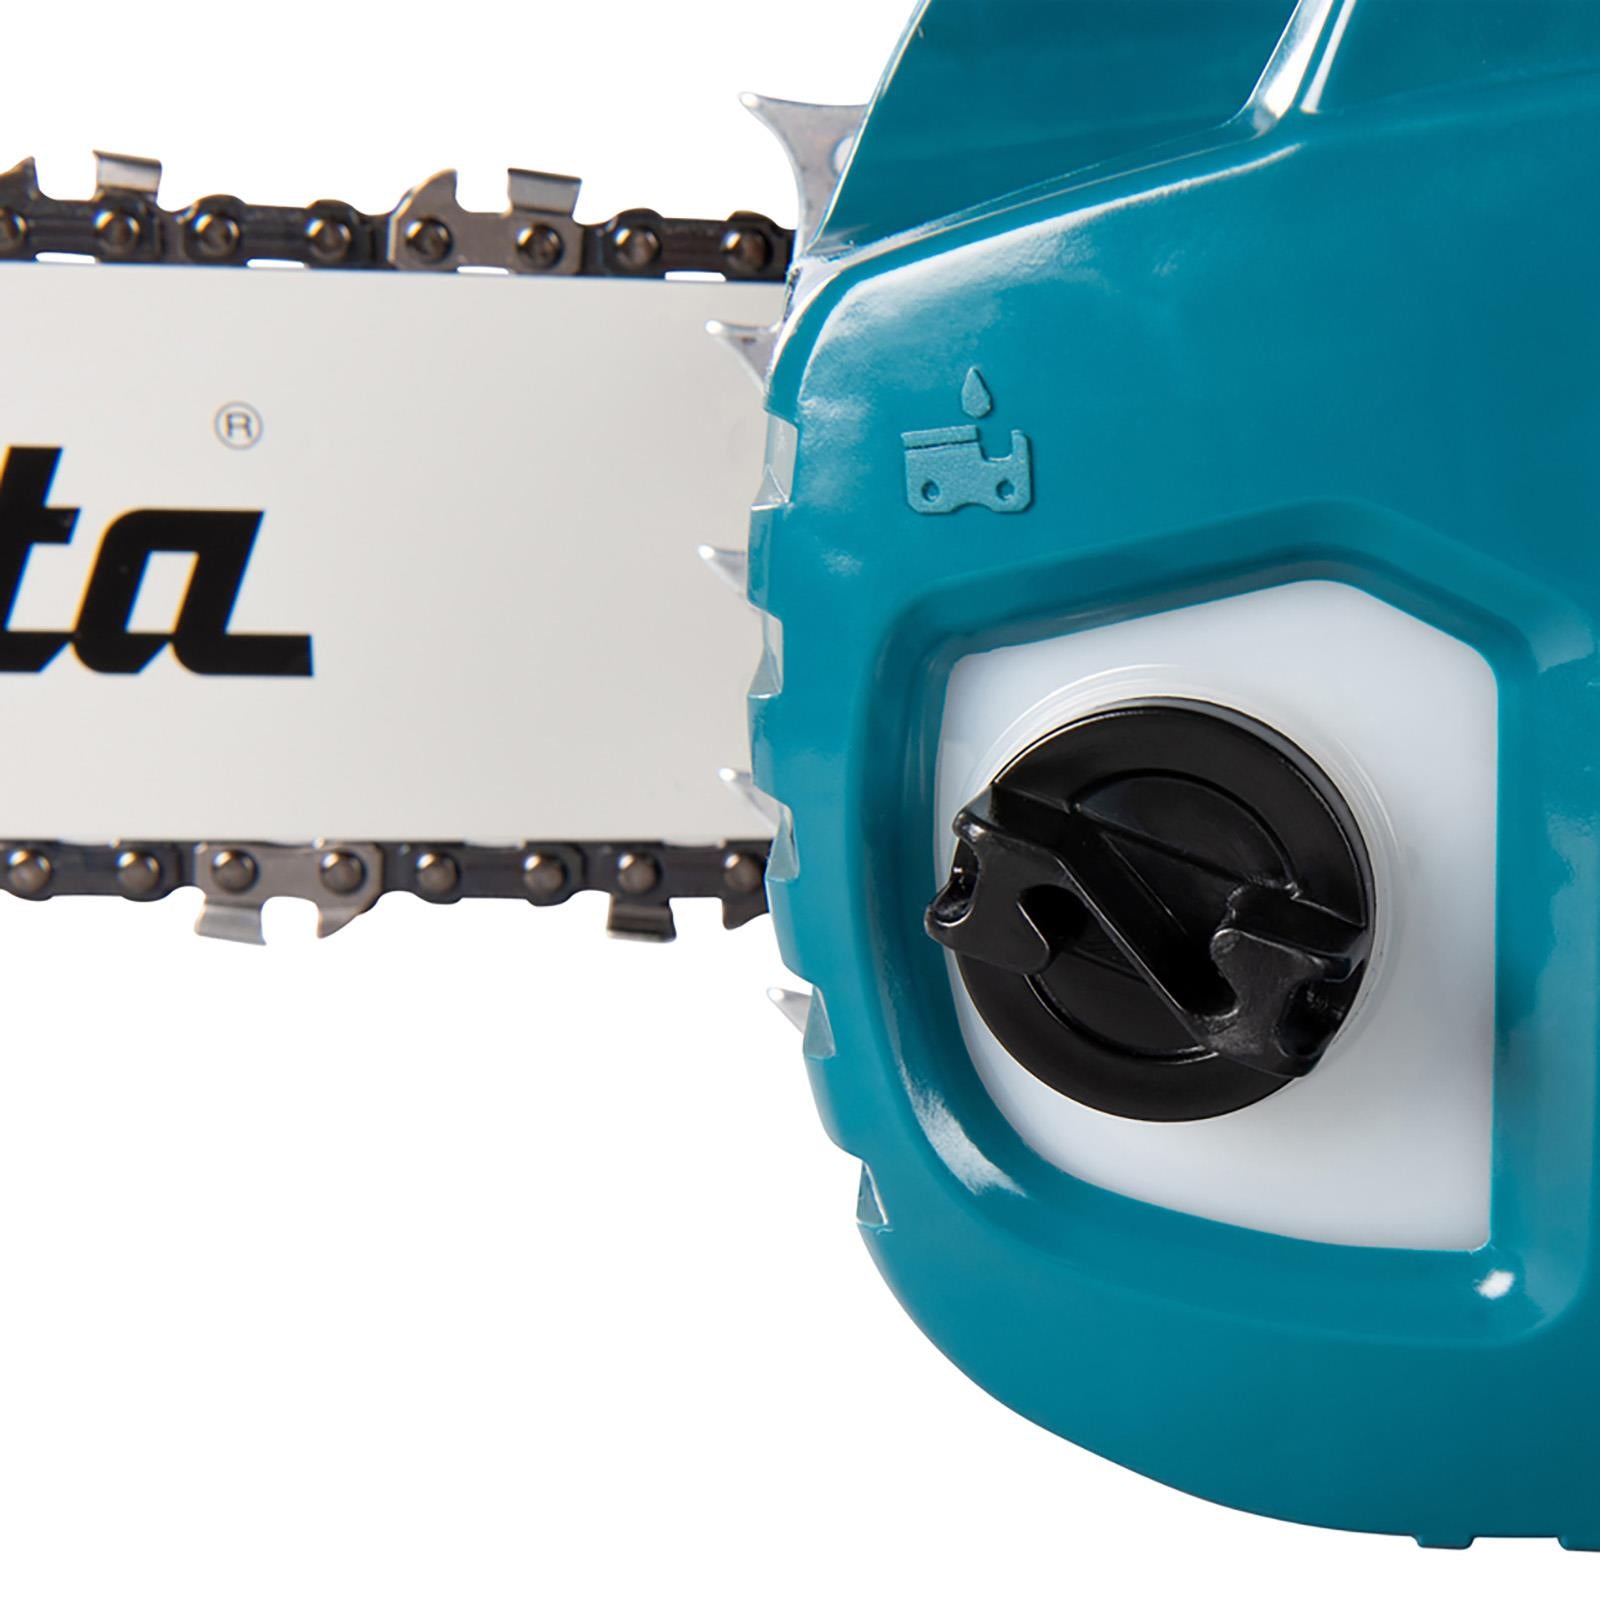 Makita Chainsaw 30cm 12" 18V x 2 LXT Brushless Cordless Garden Tree Cutting Pruning Bare Unit Body Only DUC305Z